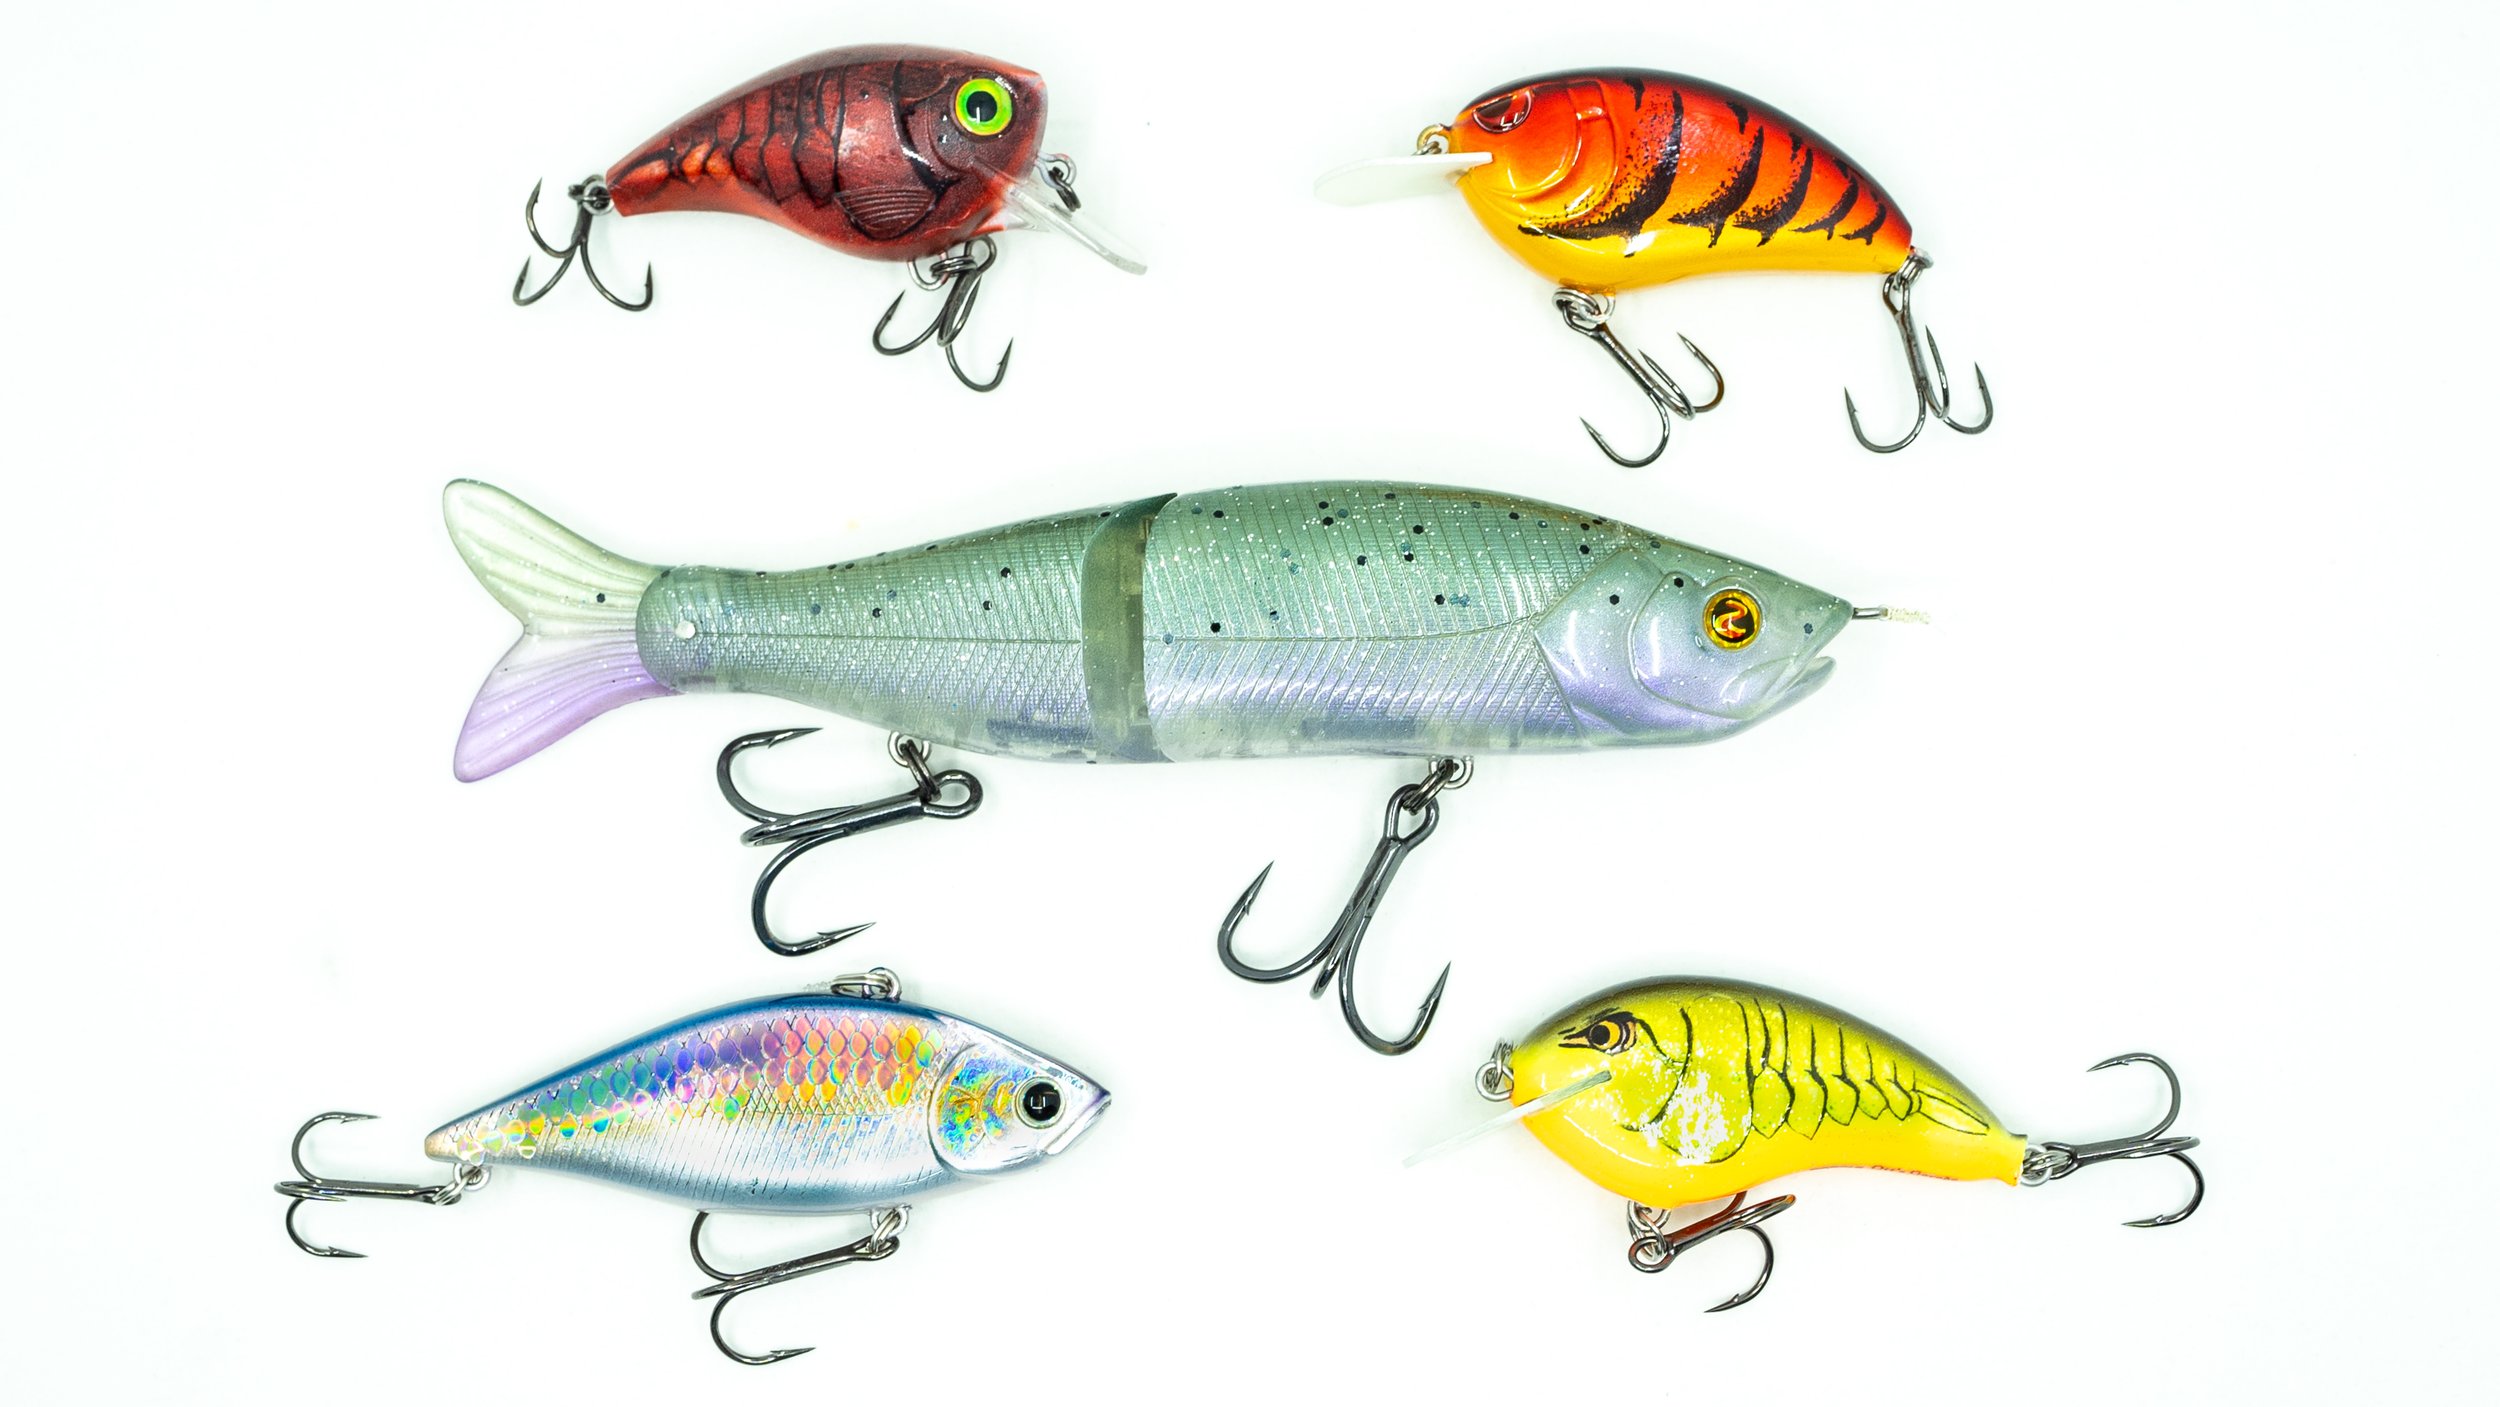 Top 5 Baits For Early Spring Bass Fishing! — Tactical Bassin